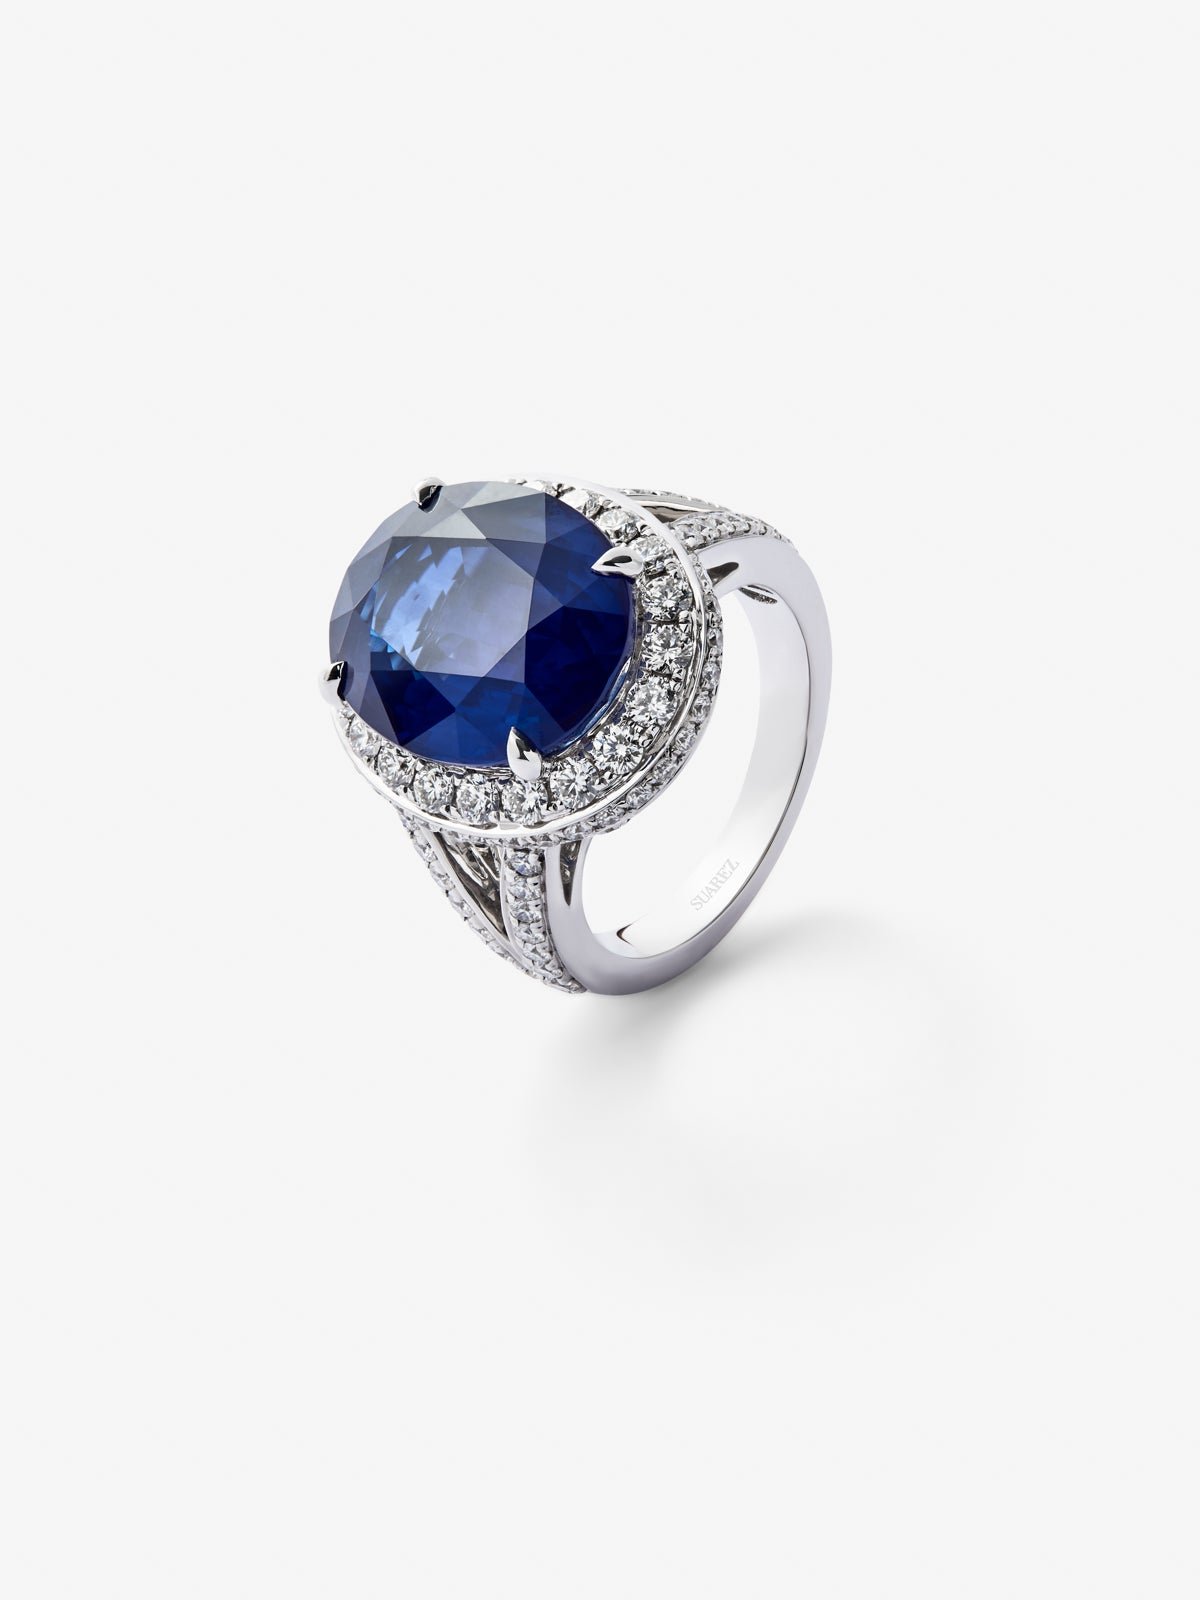 18K white gold ring with oval-cut royal blue sapphire of 12.64 cts and border and arm of 93 diamonds with a total of 1.74 cts